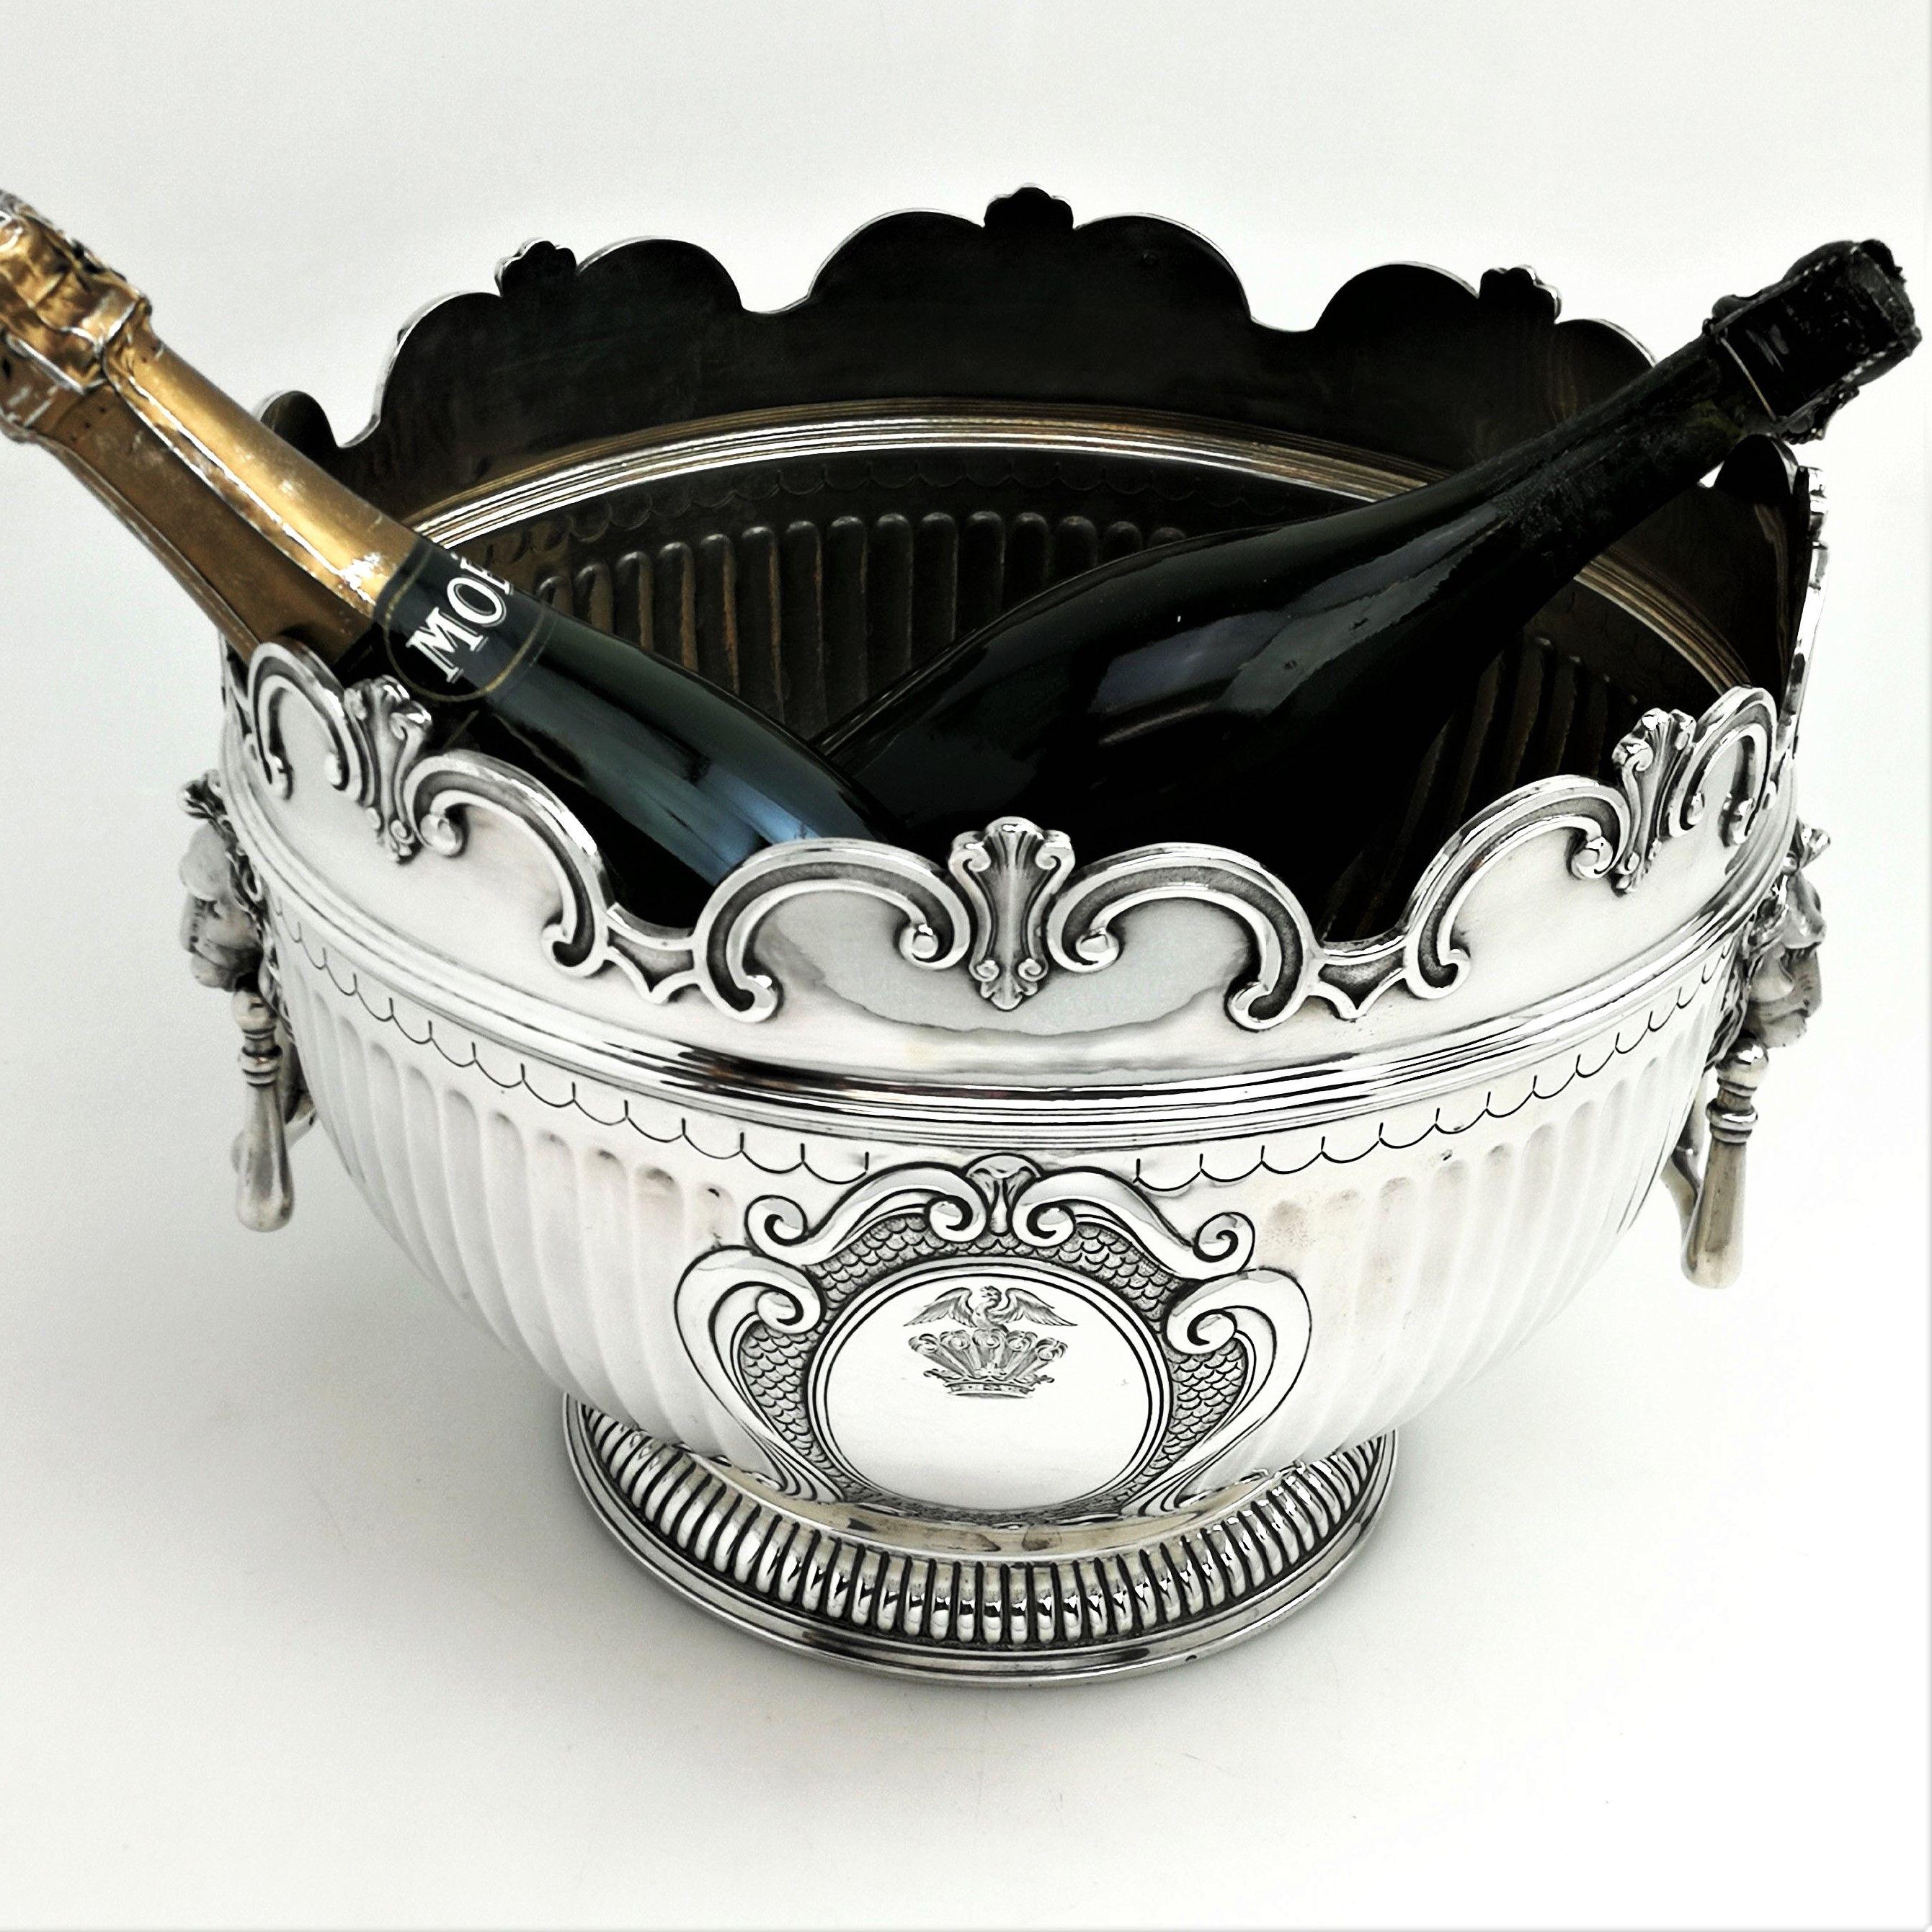 A magnificent antique Victorian sterling silver Monteith style bowl. This bowl is large enough to be used as a punch bowl or a champagne / wine cooler / ice bucket. The Bowl has a classic half fluted chasing and a pair of impressive lion head